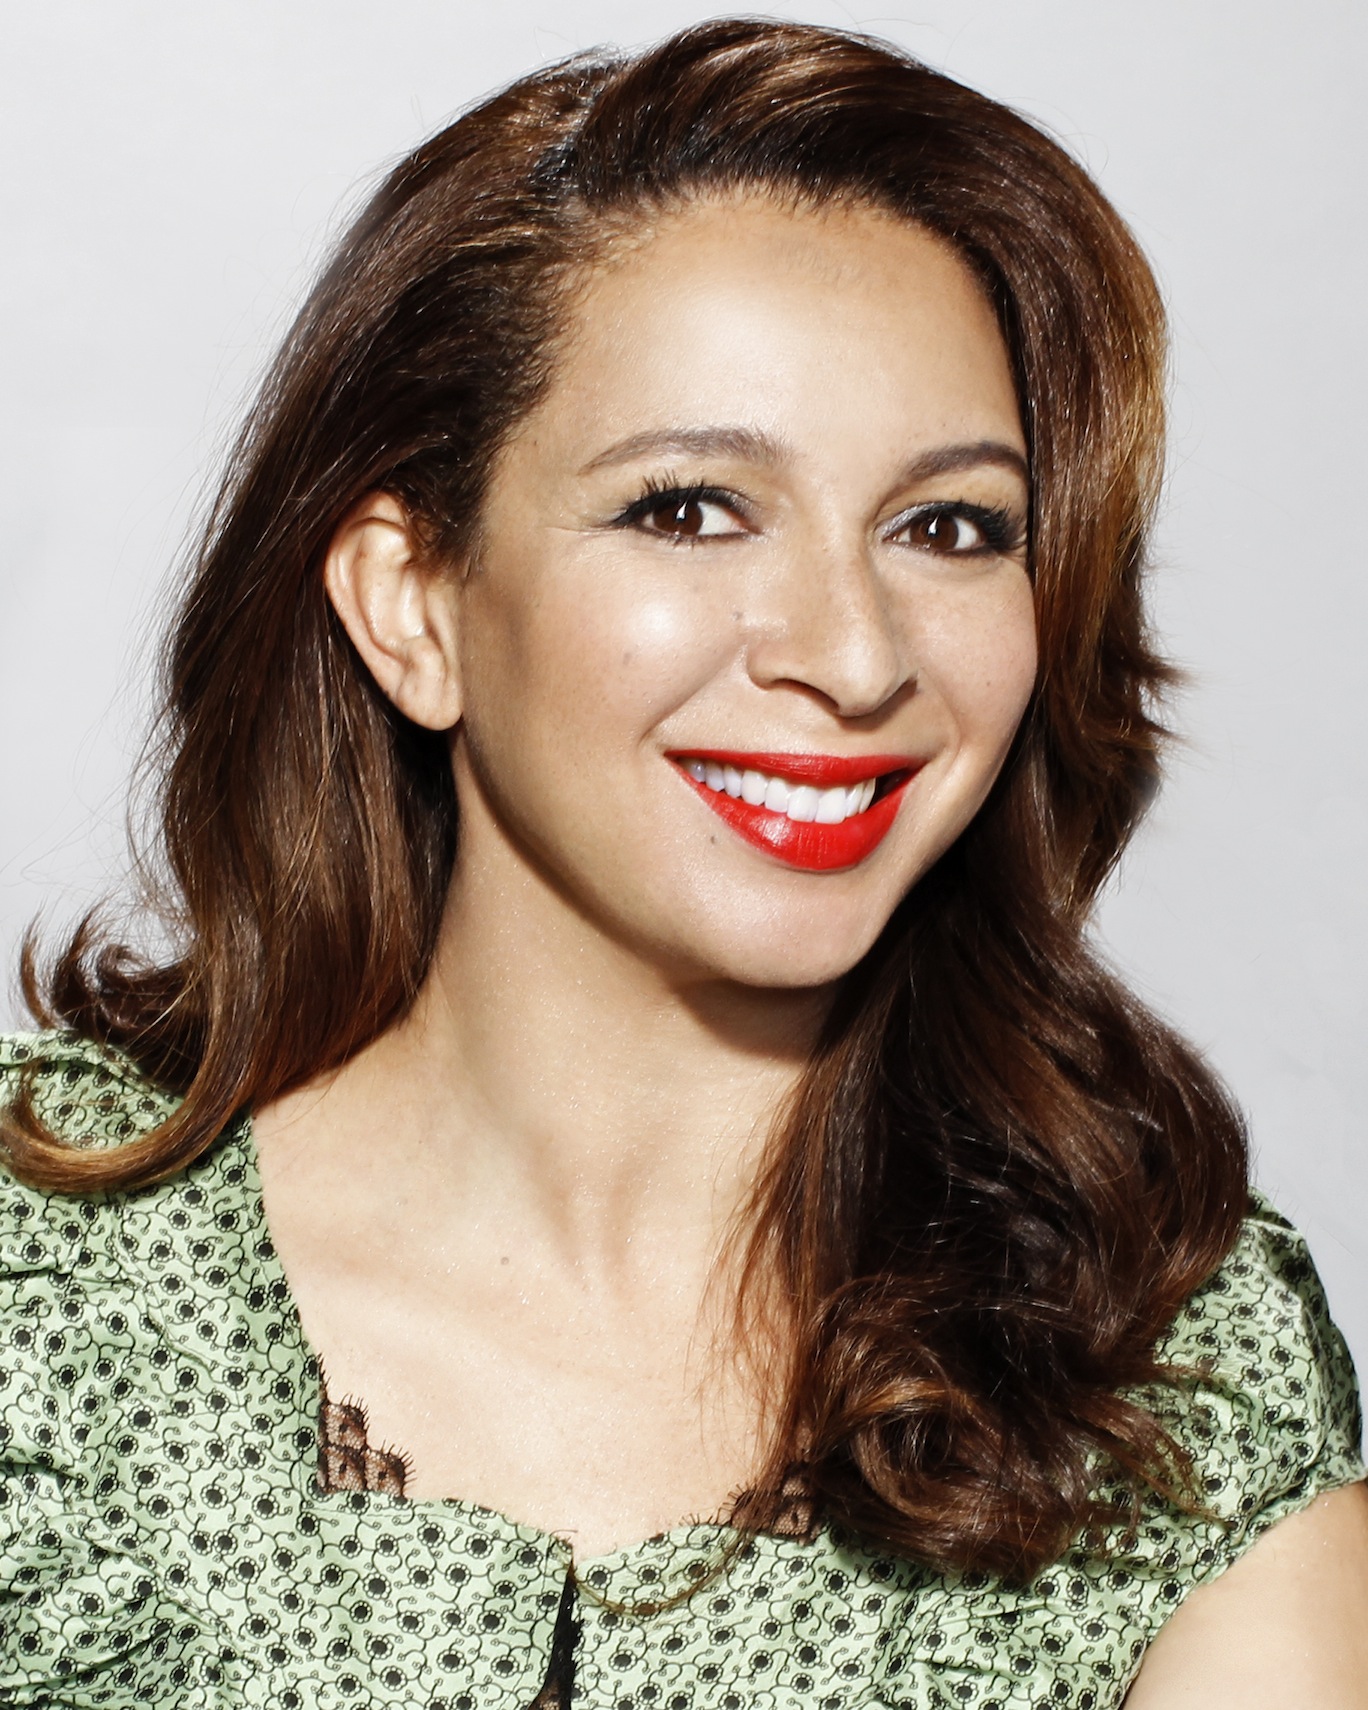 Actress and "Saturday Night Live" veteran Maya Rudolph will be among the featured panelists during 14th Annual Women in Focus.